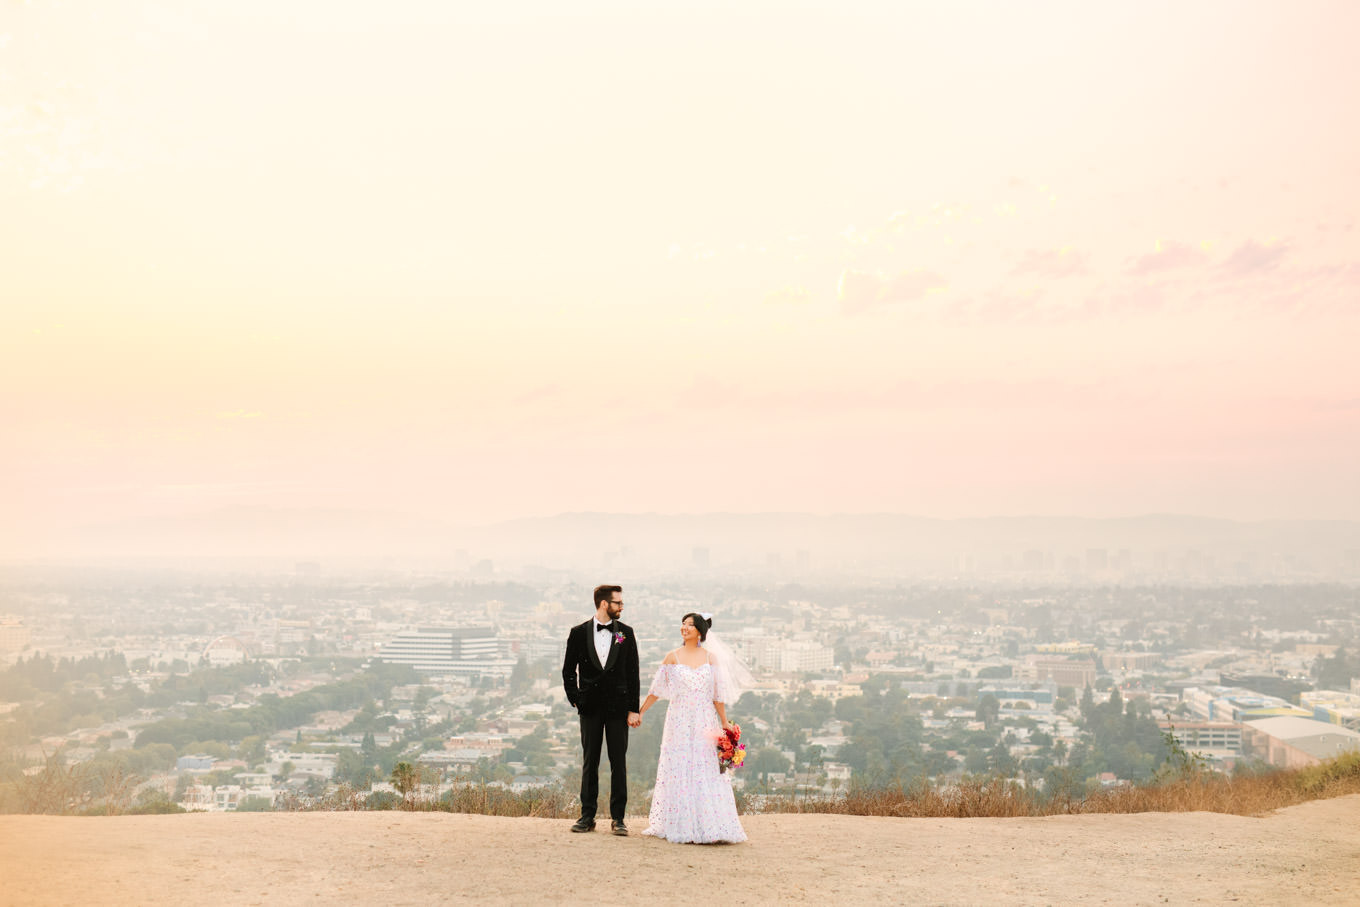 Bride and groom at scenic overlook in Los Angeles | Engagement, elopement, and wedding photography roundup of Mary Costa’s favorite images from 2020 | Colorful and elevated photography for fun-loving couples in Southern California | #2020wedding #elopement #weddingphoto #weddingphotography #microwedding   Source: Mary Costa Photography | Los Angeles